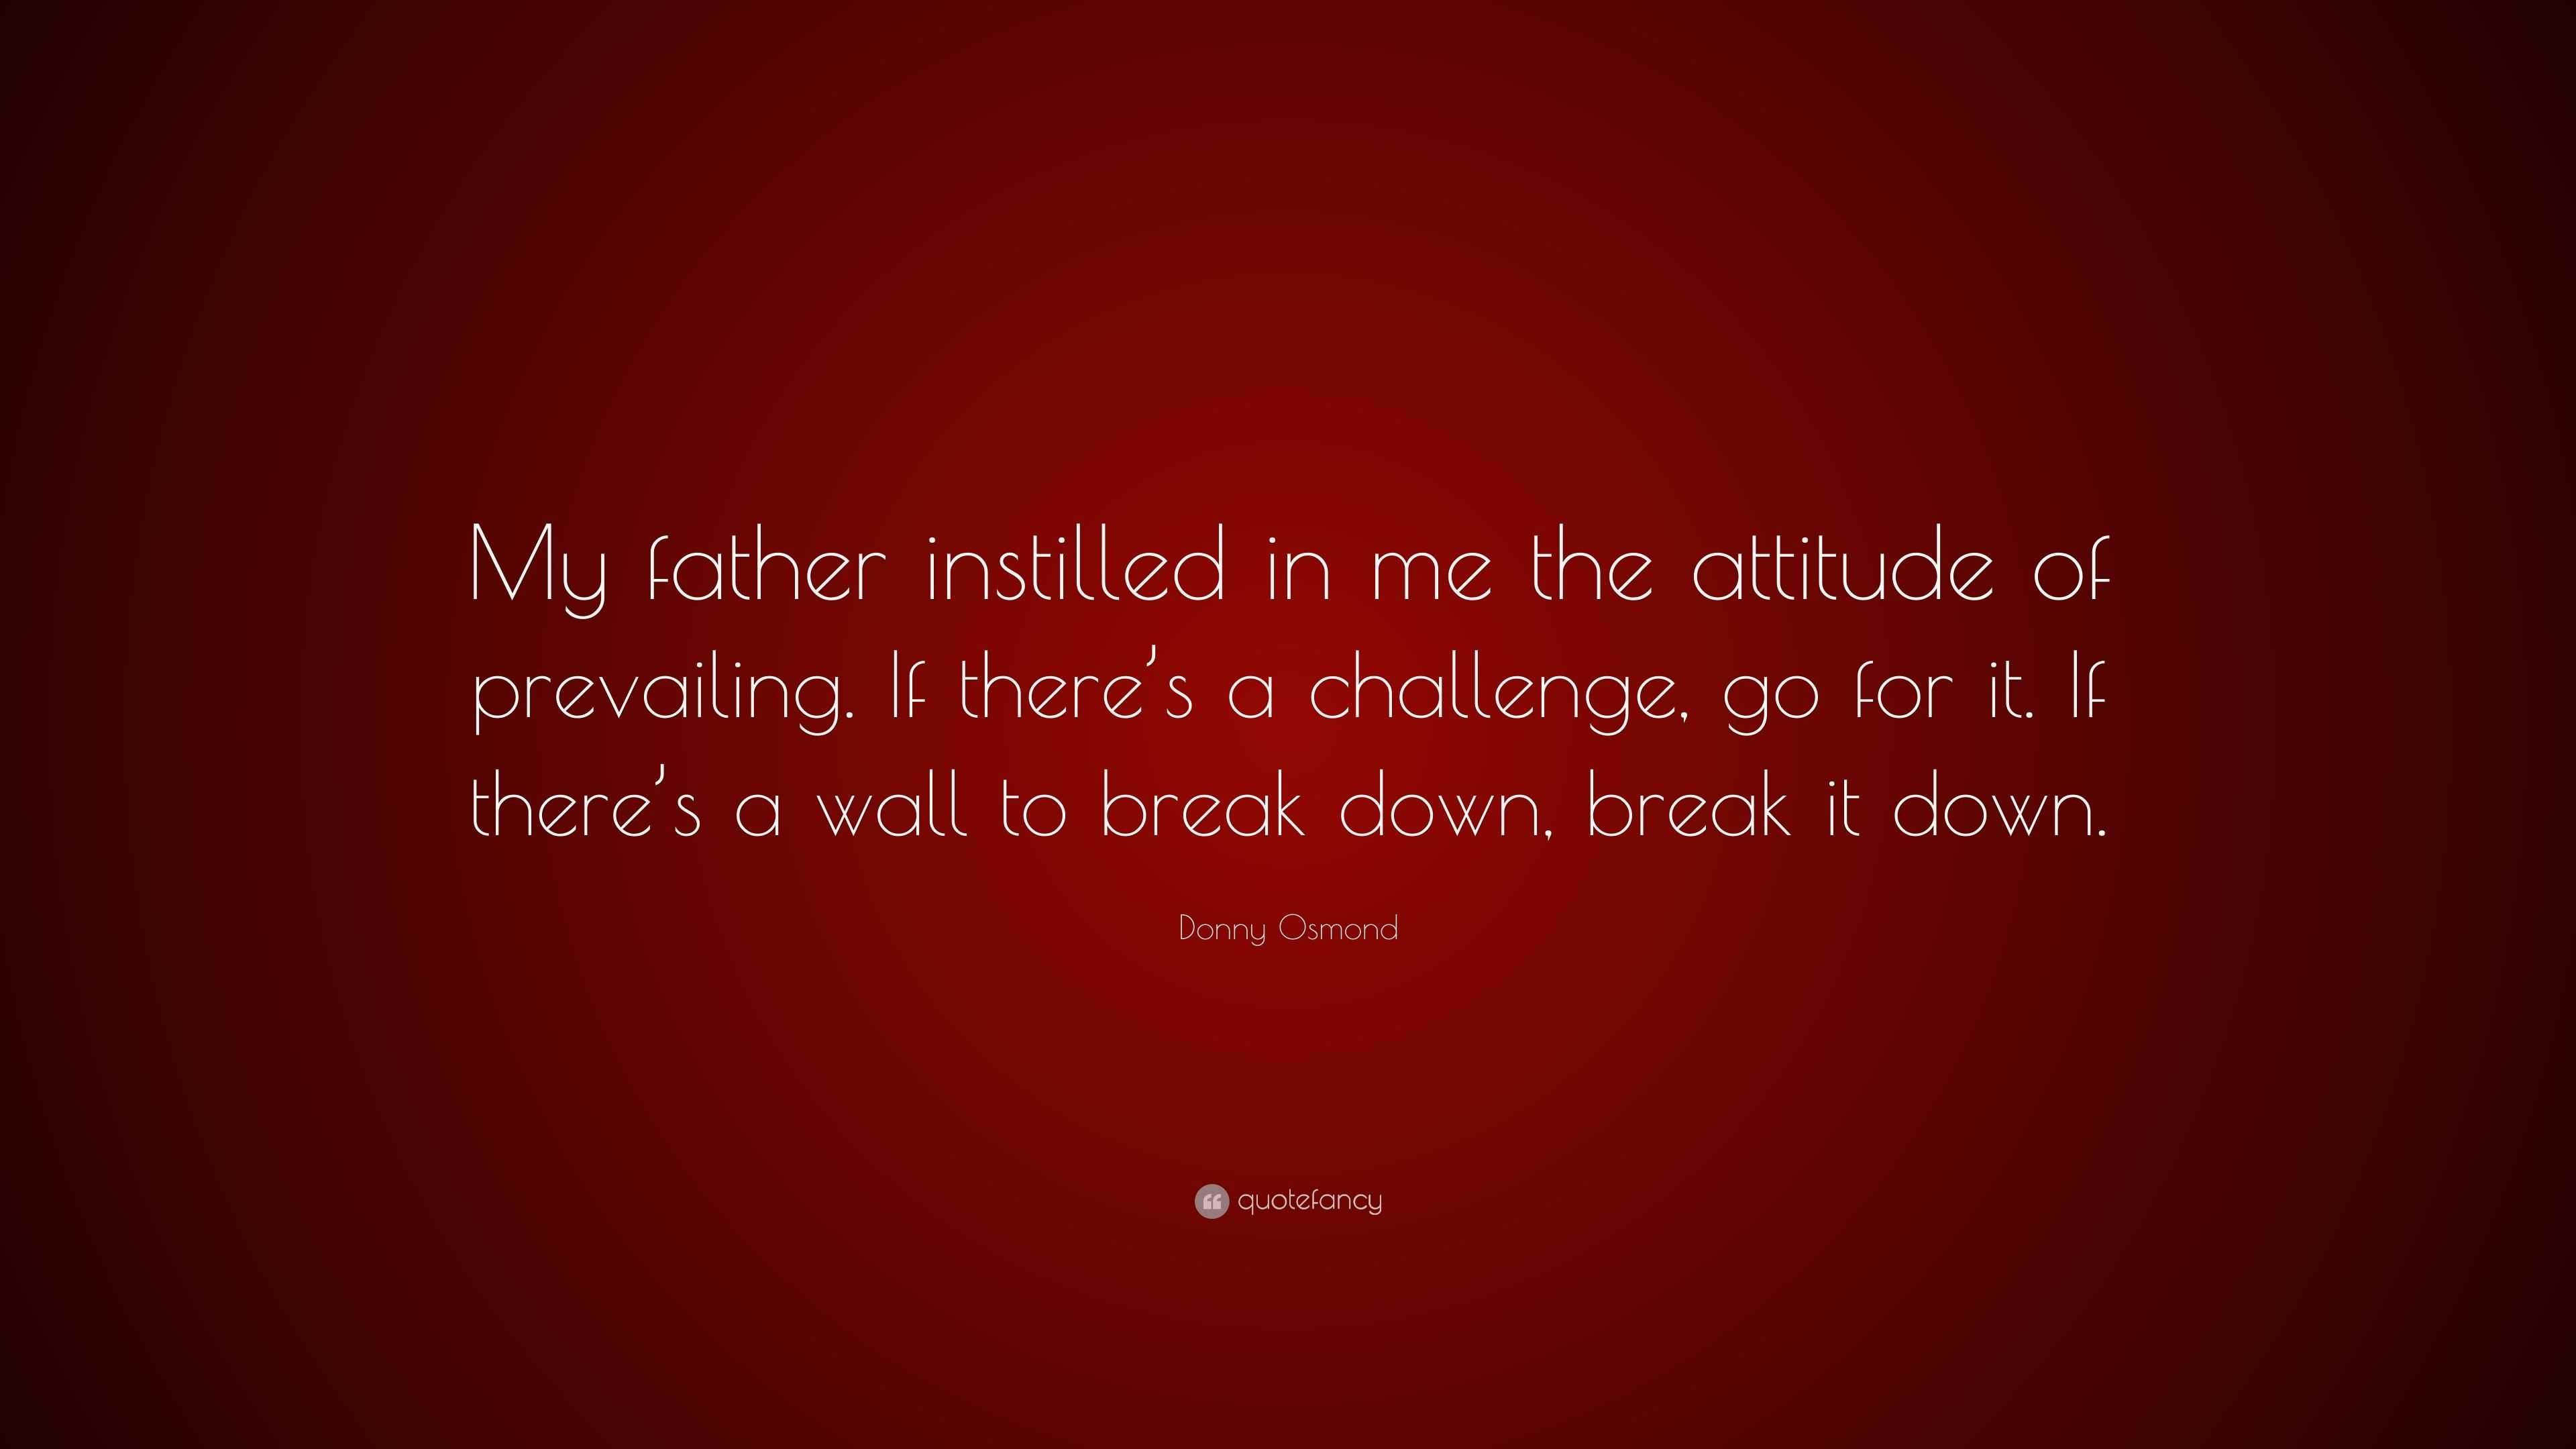 Donny Osmond Quote My Father Instilled In Me The Attitude Of Prevailing If There S A Challenge Go For It If There S A Wall To Break Down